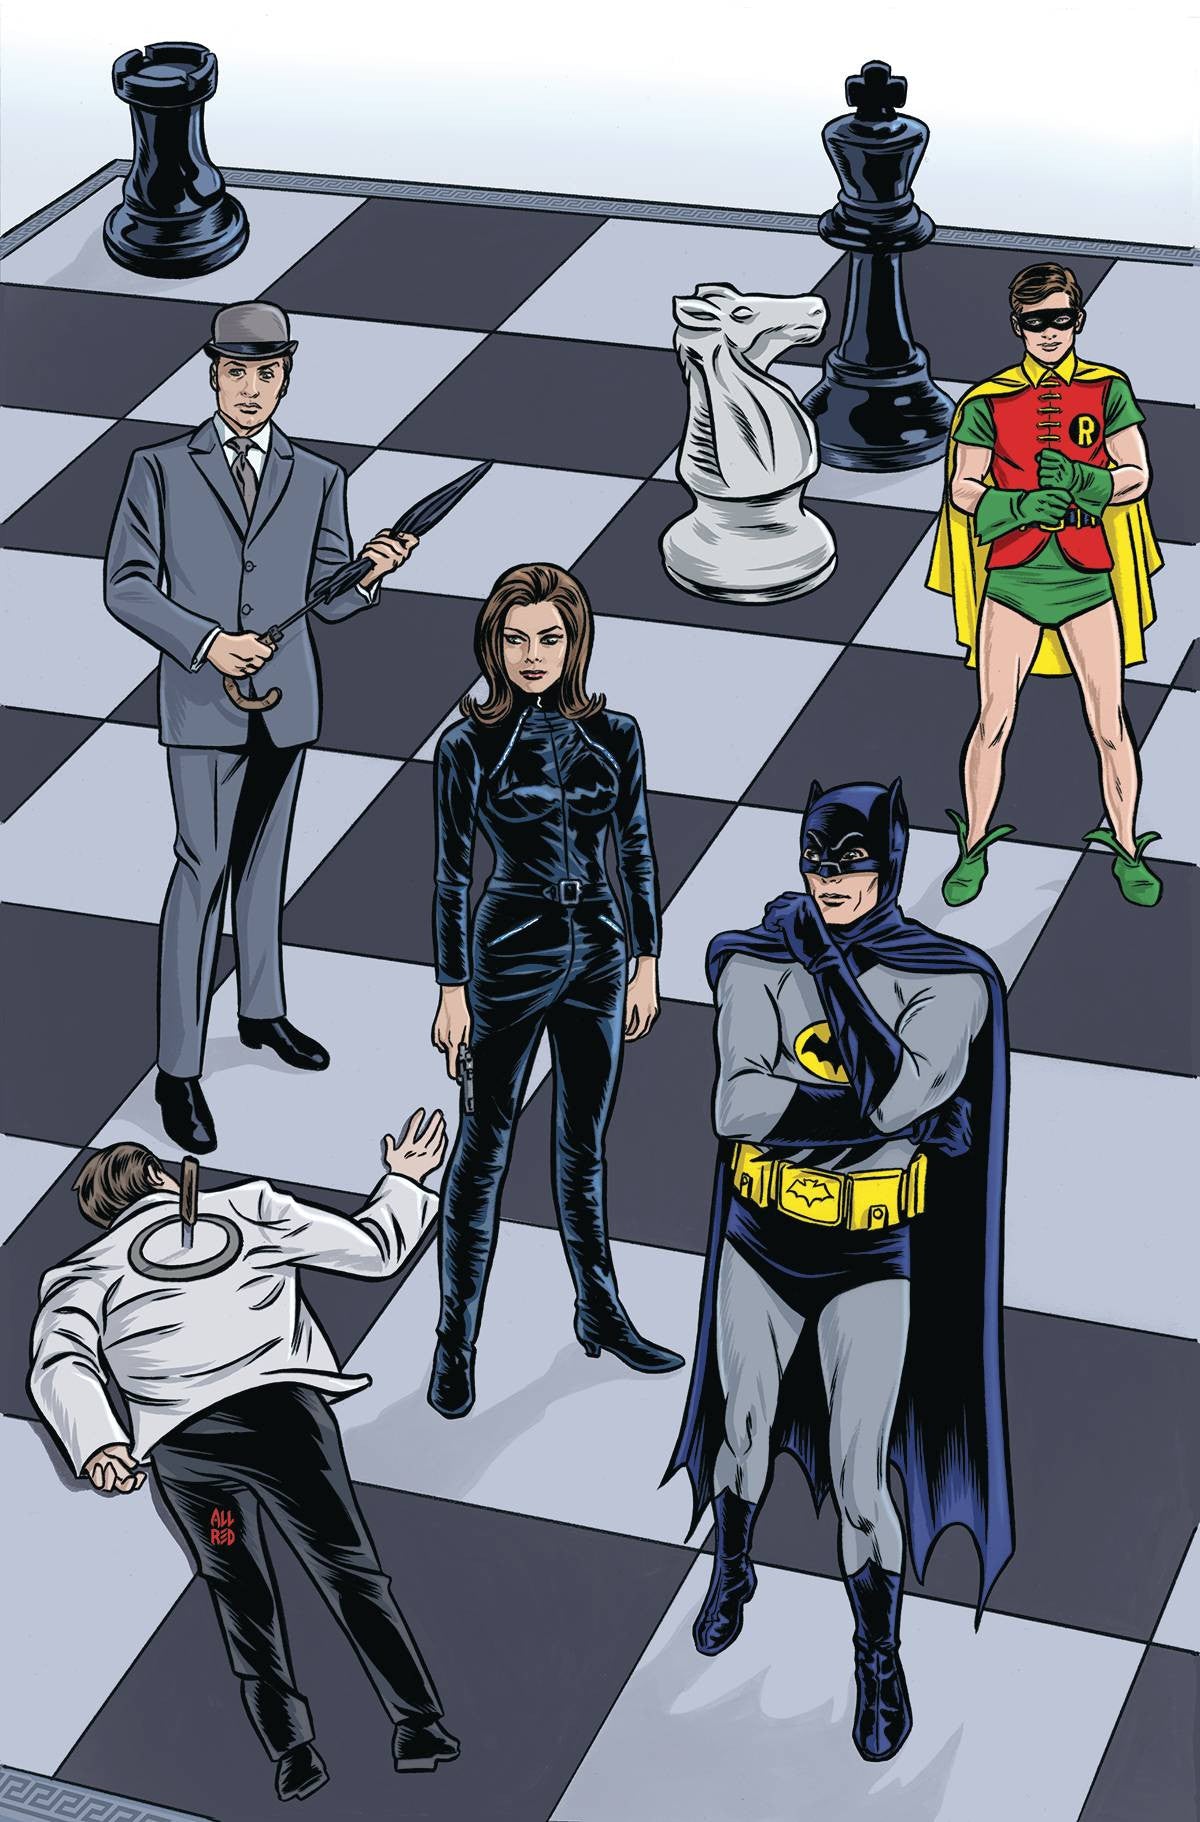 BATMAN 66 MEETS STEED AND MRSPEEL #1 (OF 6) COVER